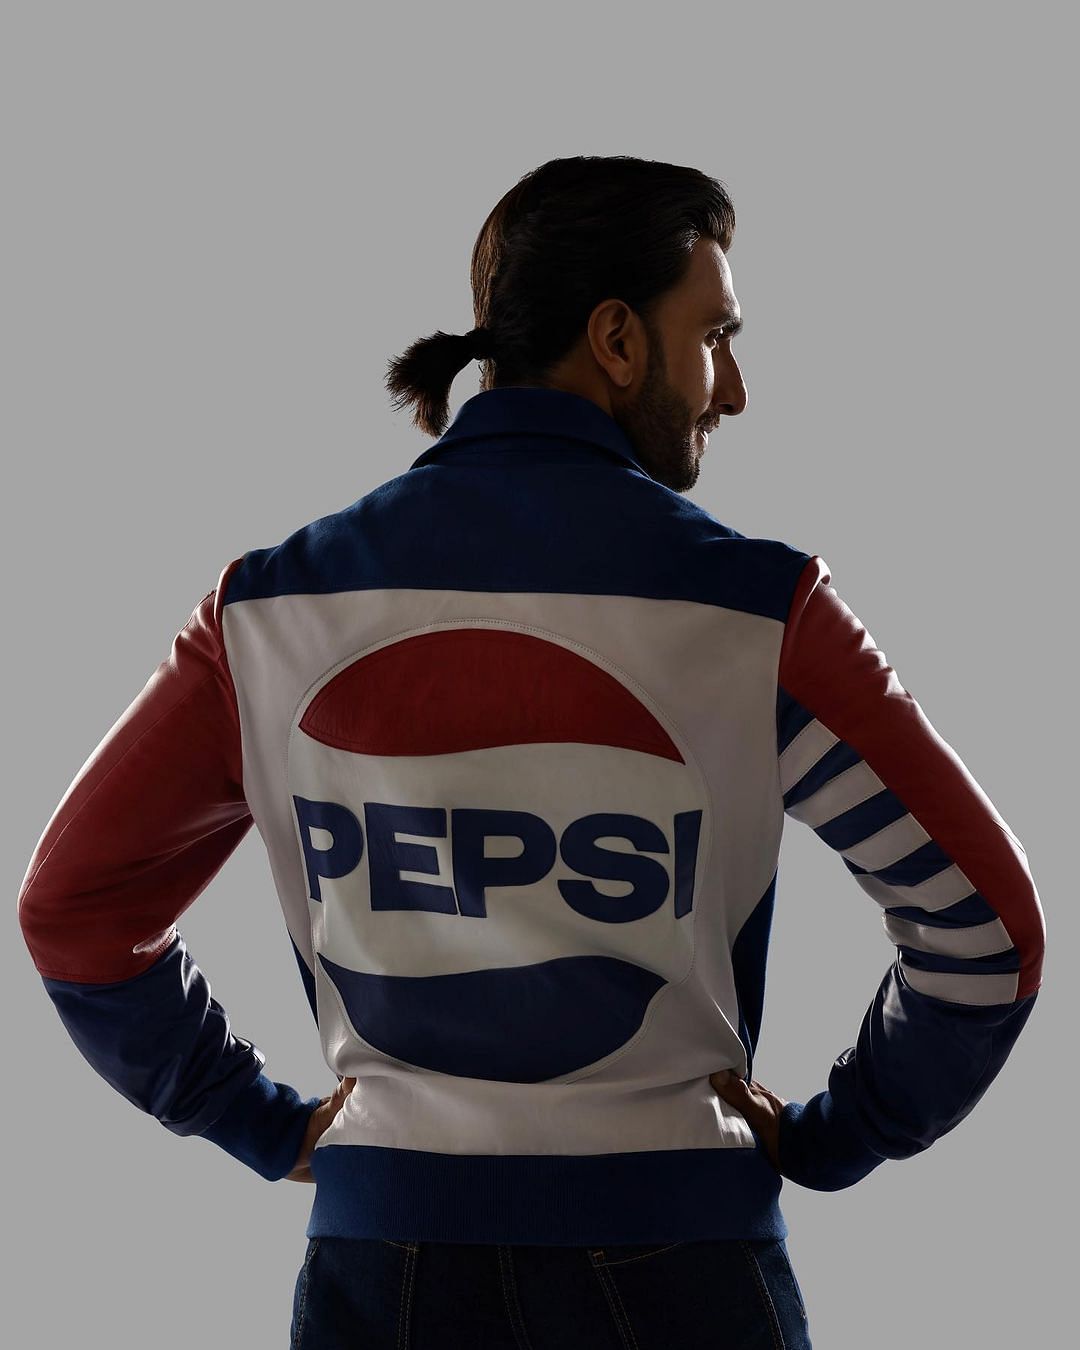 Singh's collaboration with Pepsi India